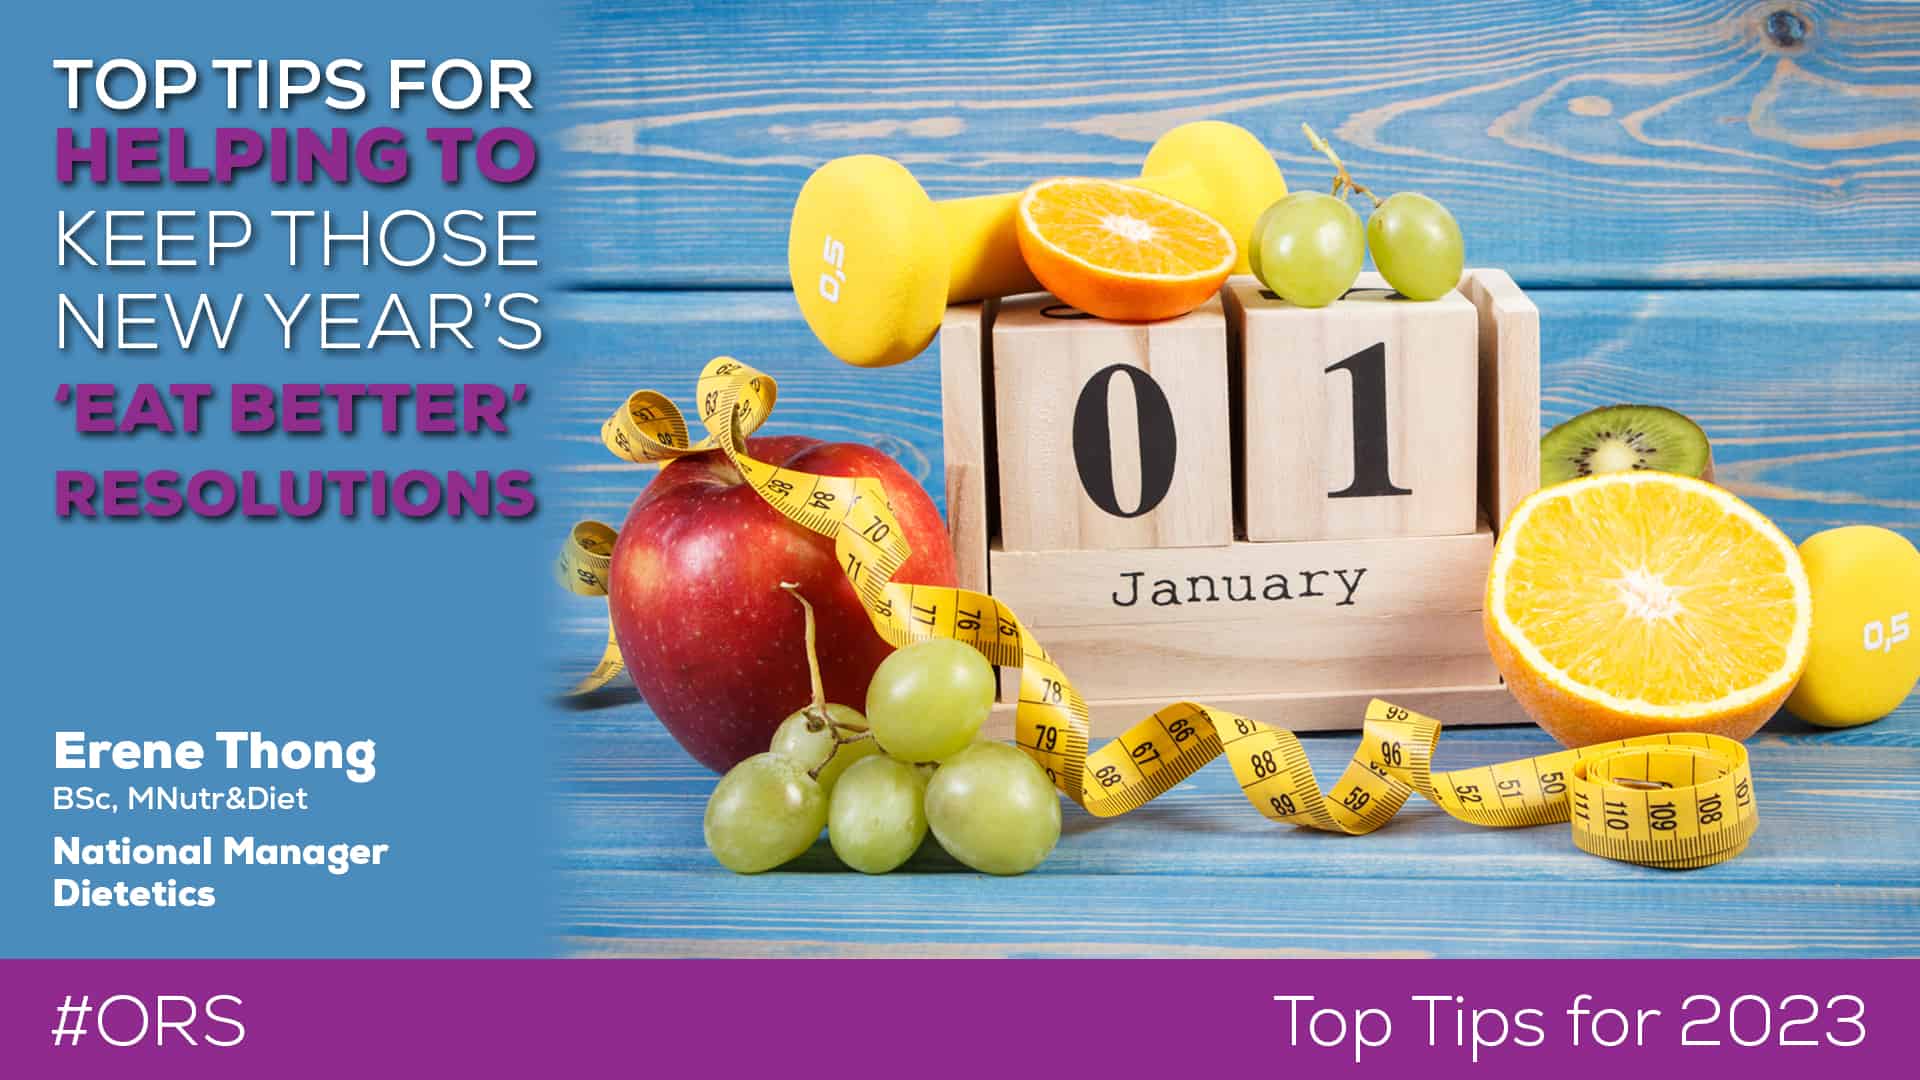 "TOP TIPS FOR HELPING TO KEEP THOSE NEW YEAR'S 'EAT BETTER RESOLUTIONS - Blog article By Erene Thong - National Manager Dietetics